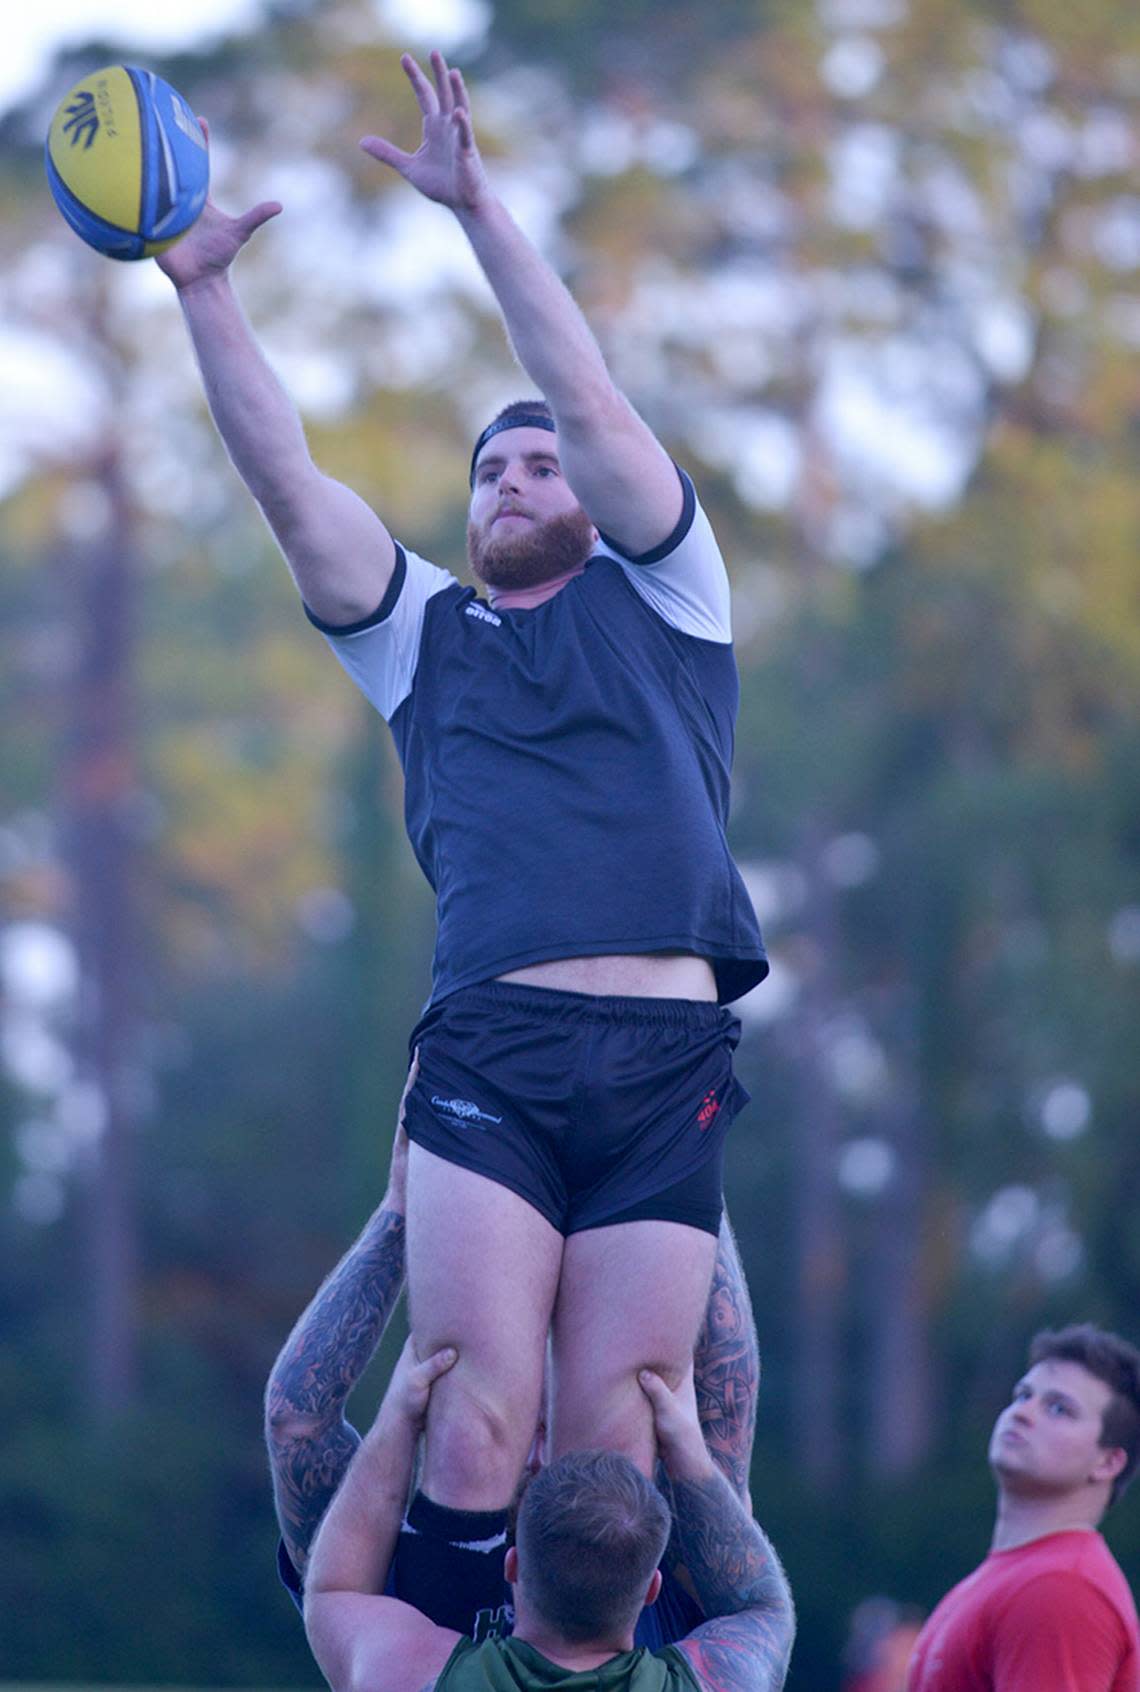 Alex MacDonald puts the work in during the practicing of line-out drill at Hilton Head’s Chaplain Community Park. This was during one of the squads first practices since the team disbanded after the 2017 season. Robert York